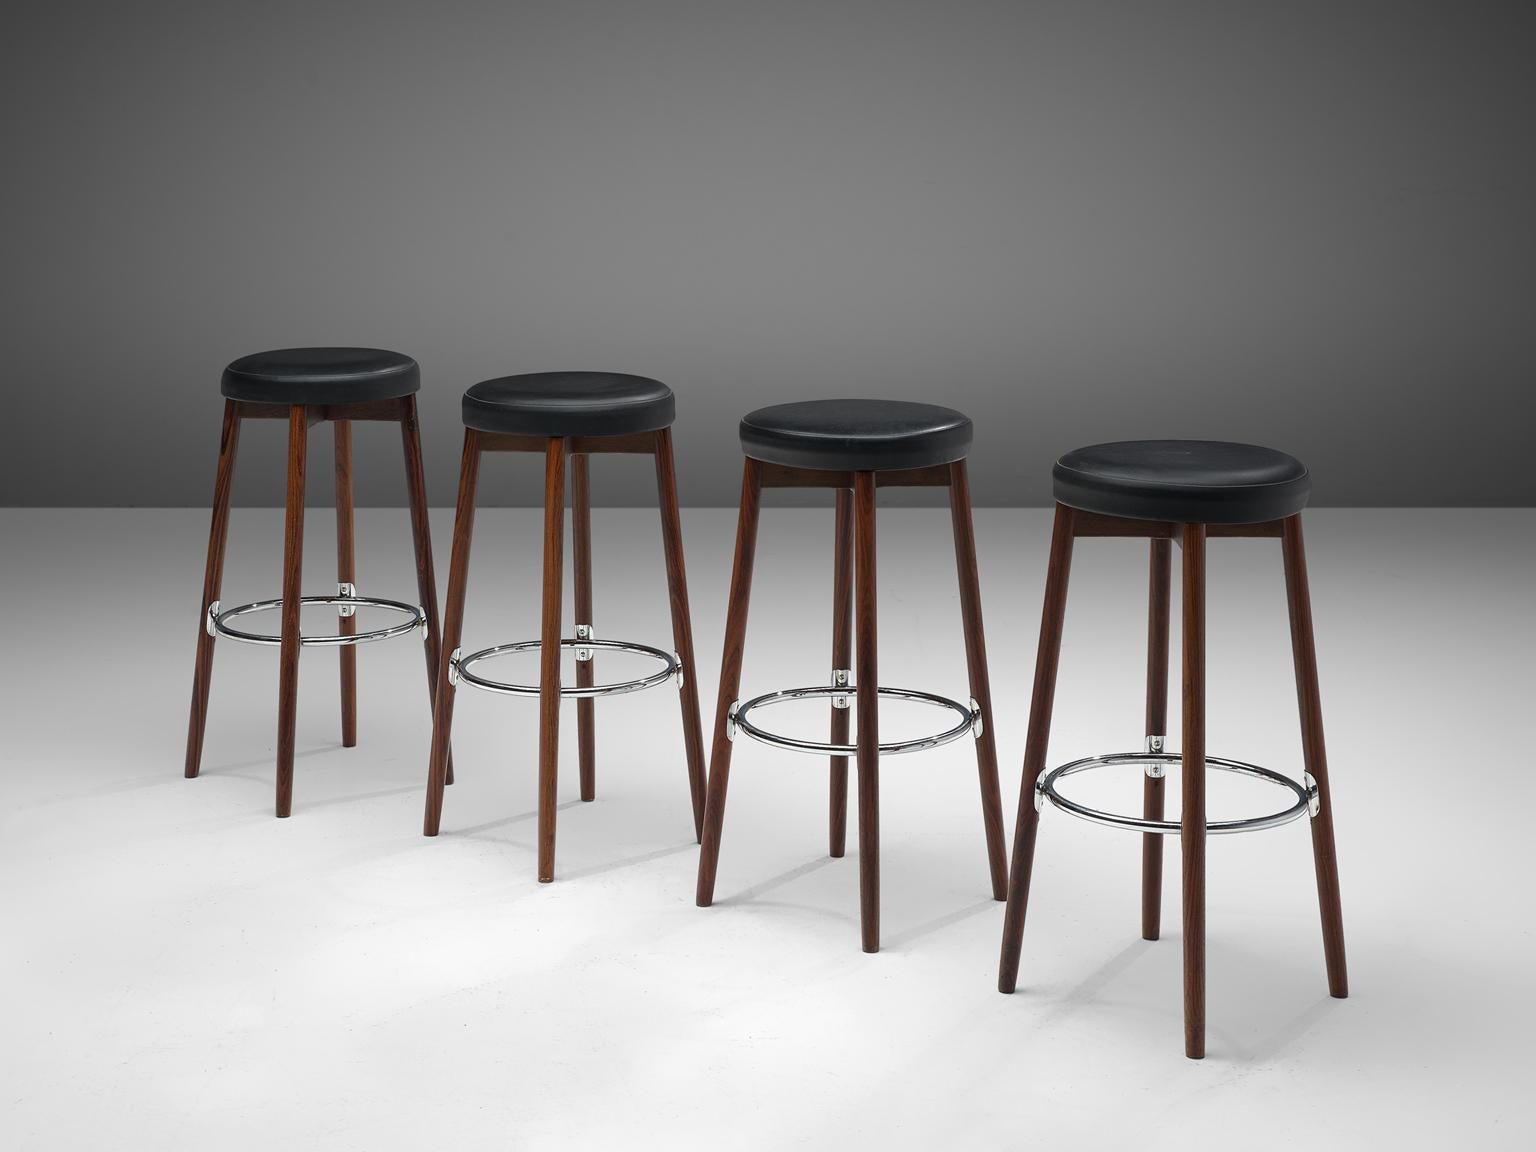 Hugo Frandsen for Spøttrup Mobler, set of 4 barstools, leatherette, metal and rosewood, Denmark, 1960s.

This set of 4 bar stools, designed by Hugo Frandsen, is very solid and modest in its appearance. The metal ring that connects the four